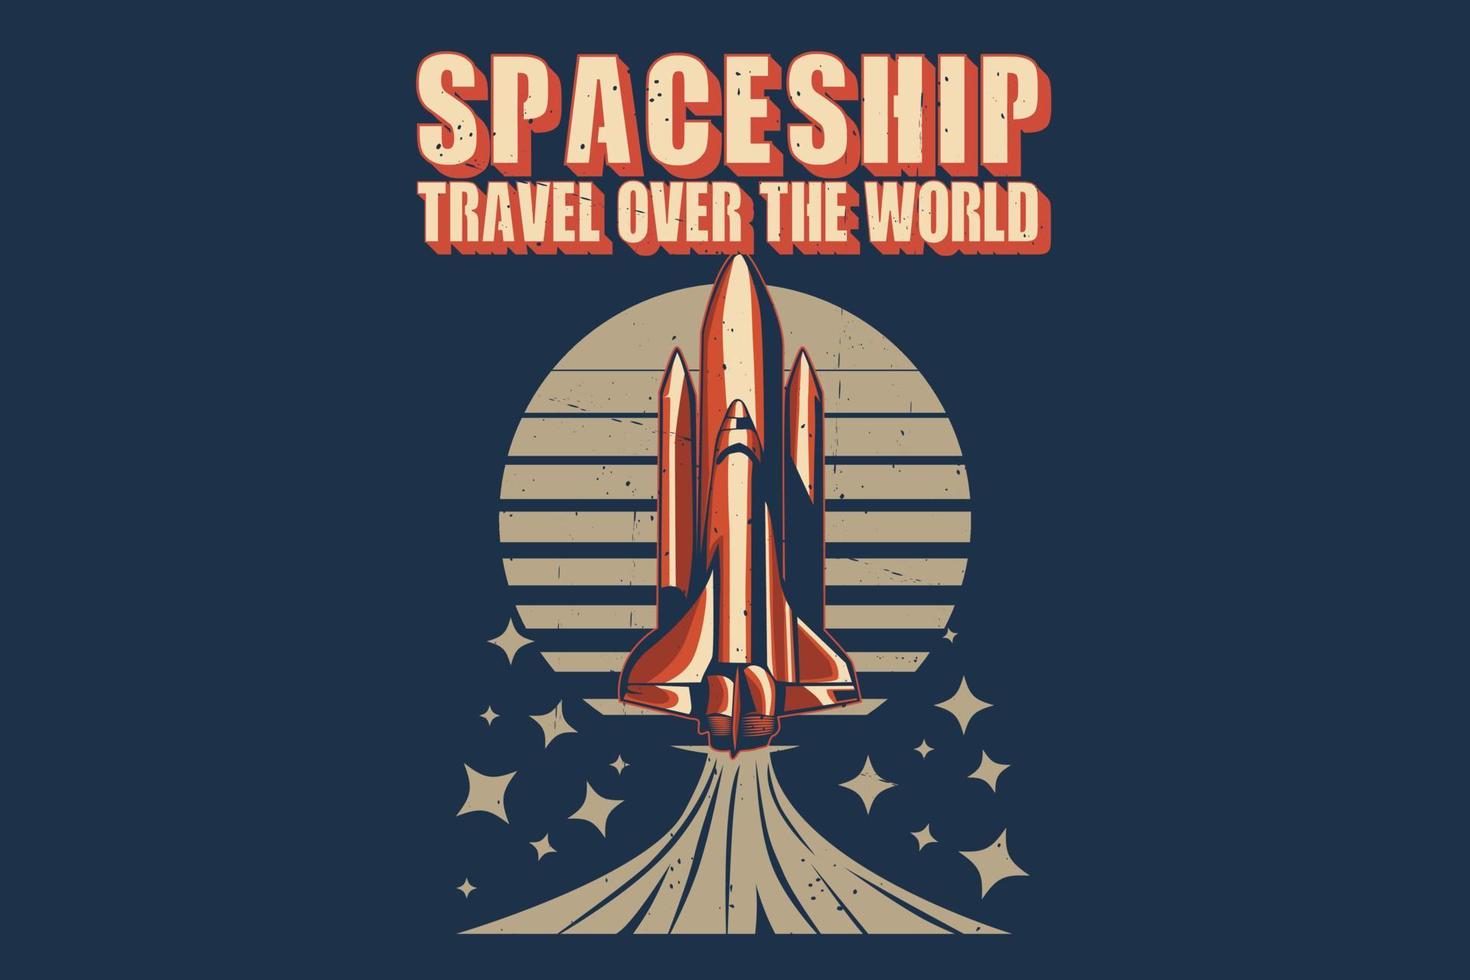 Spaceship travel over the world silhouette design vector